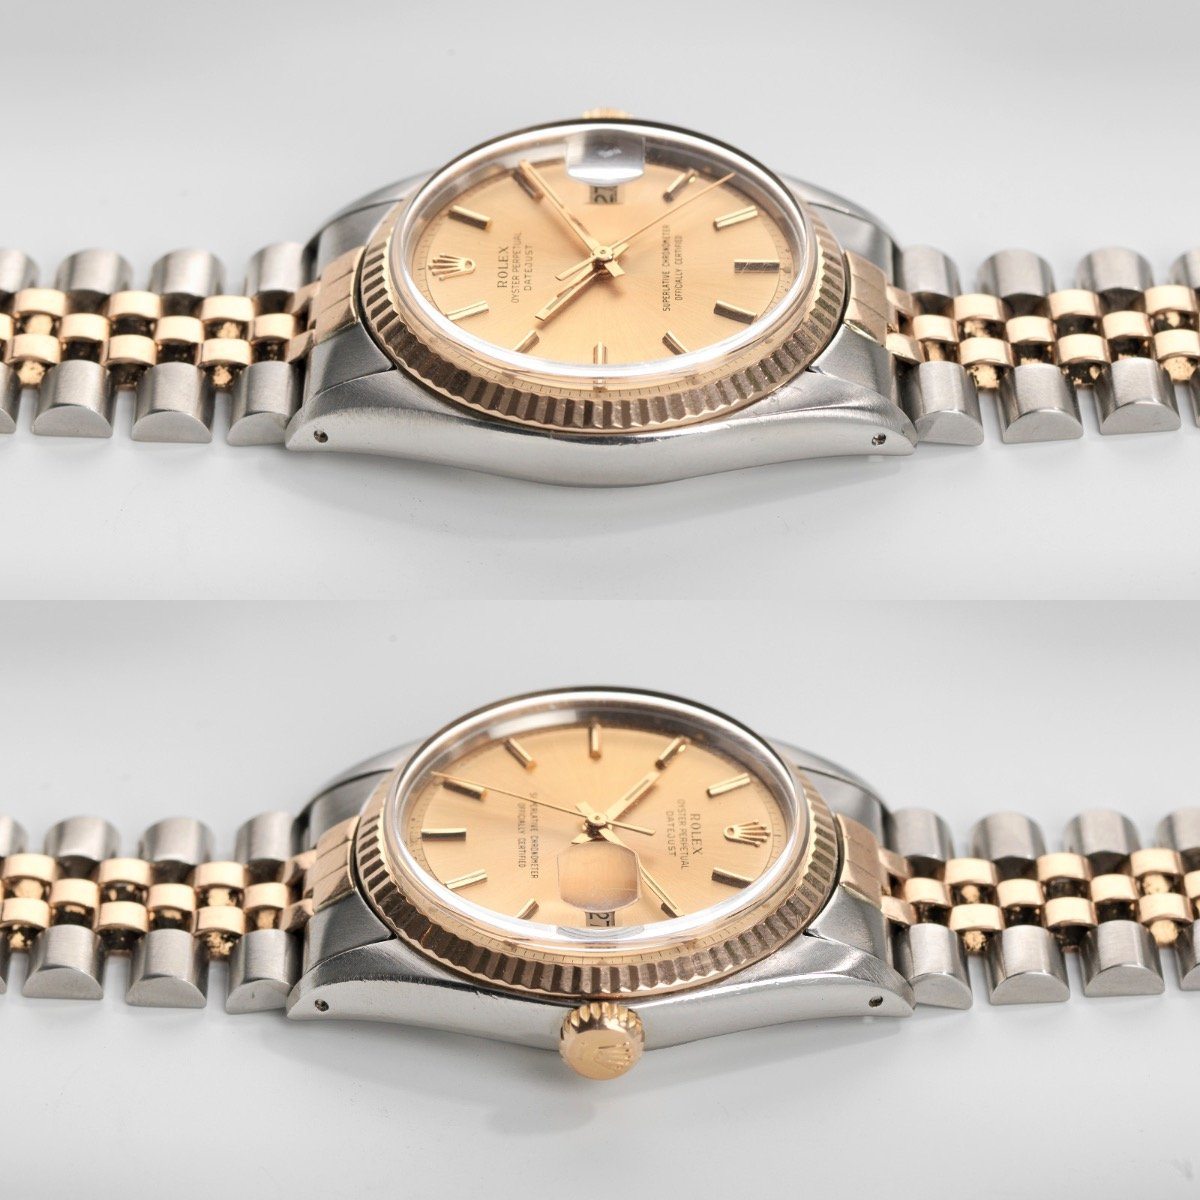 Rolex Two Tone Rose Gold 1601 Datejust